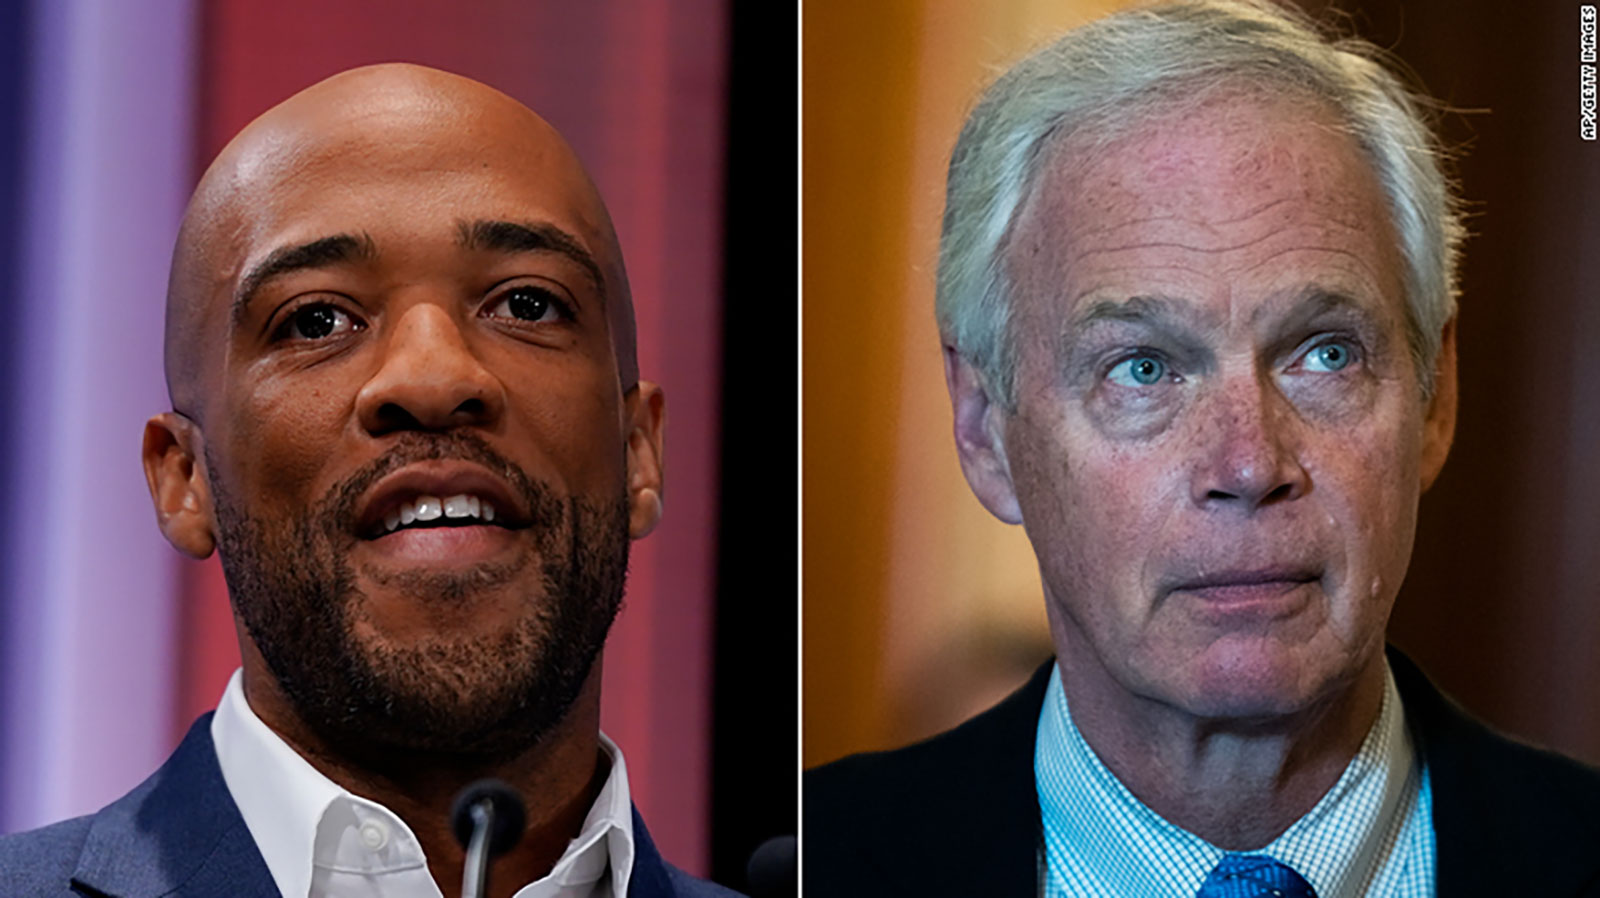 CNN Projection: Barnes and Johnson will face off in Minnesota’s high-stakes Senate battle this fall  